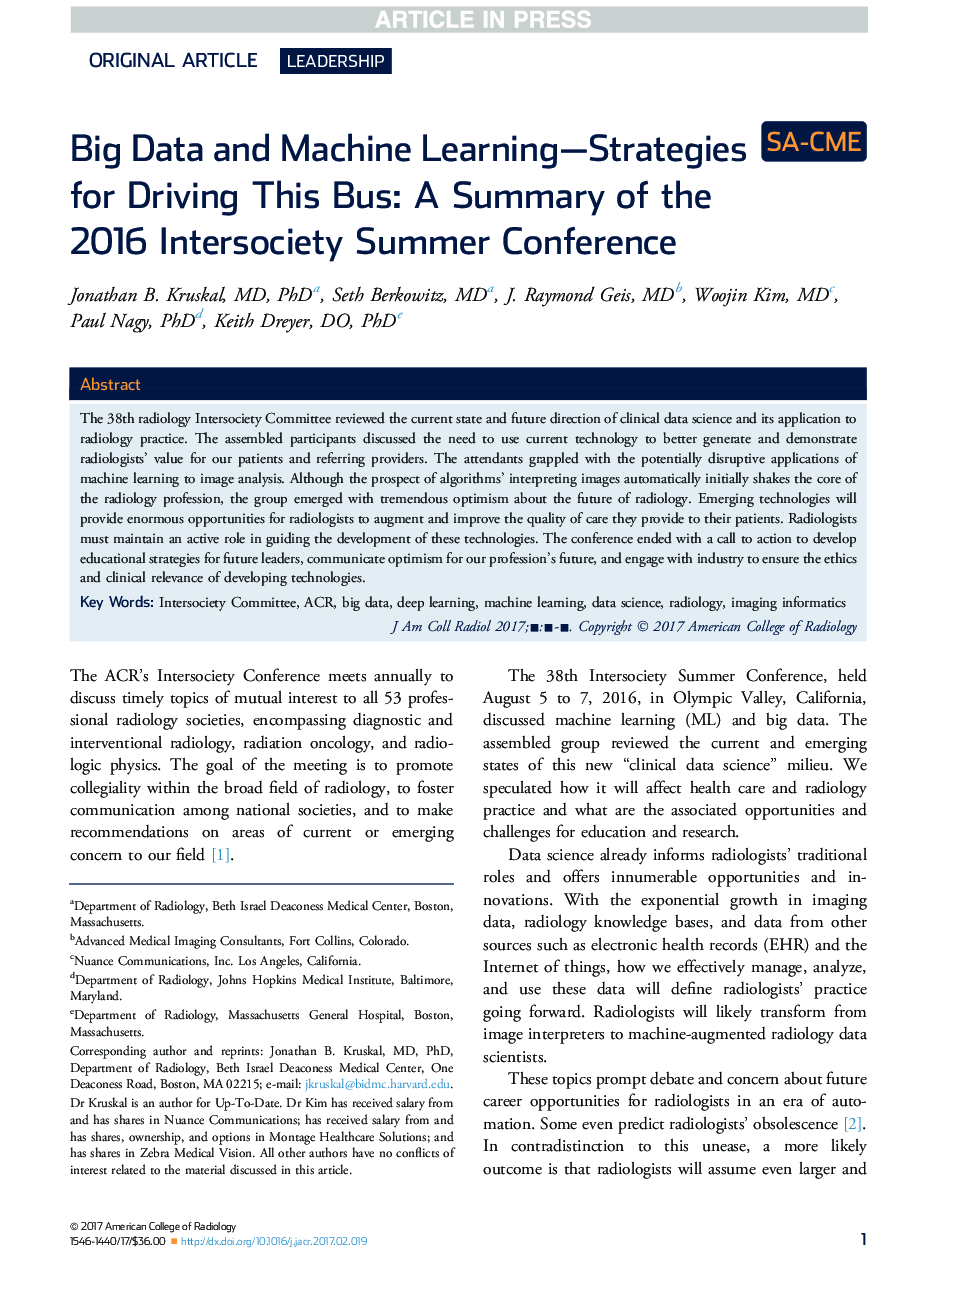 Big Data and Machine Learning-Strategies for Driving This Bus: A Summary of the 2016 Intersociety Summer Conference